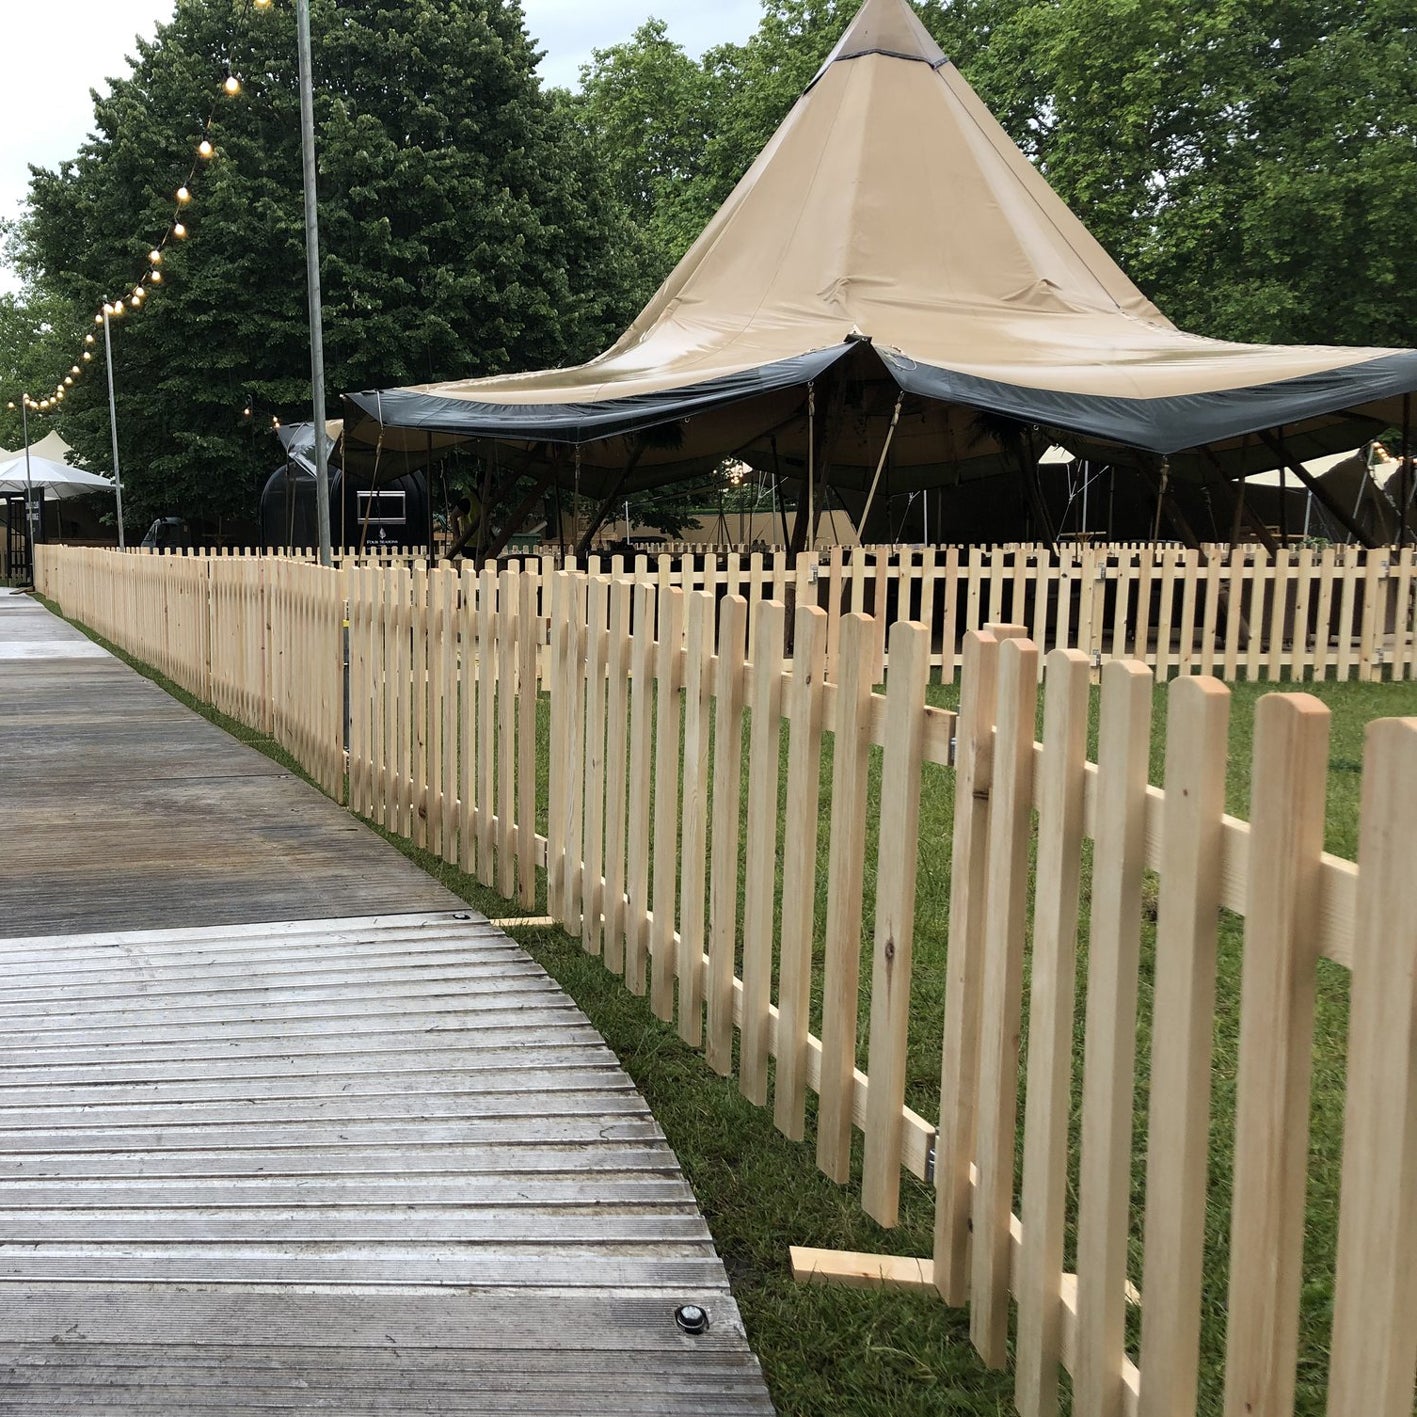 Freestanding Event Picket Fencing - Quick Fix System - Available in White or Natural finishes